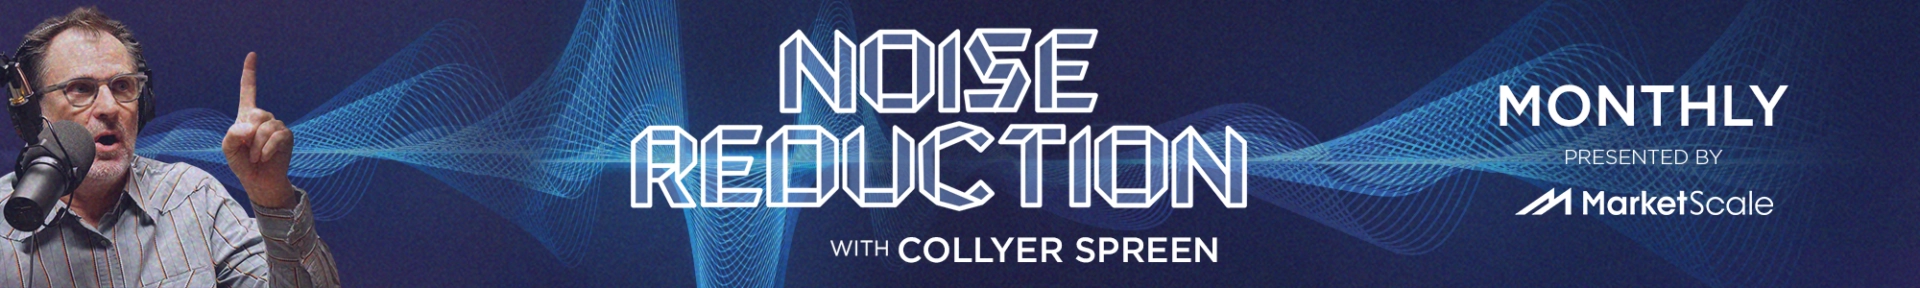 Noise Reduction with Collyer Spreen